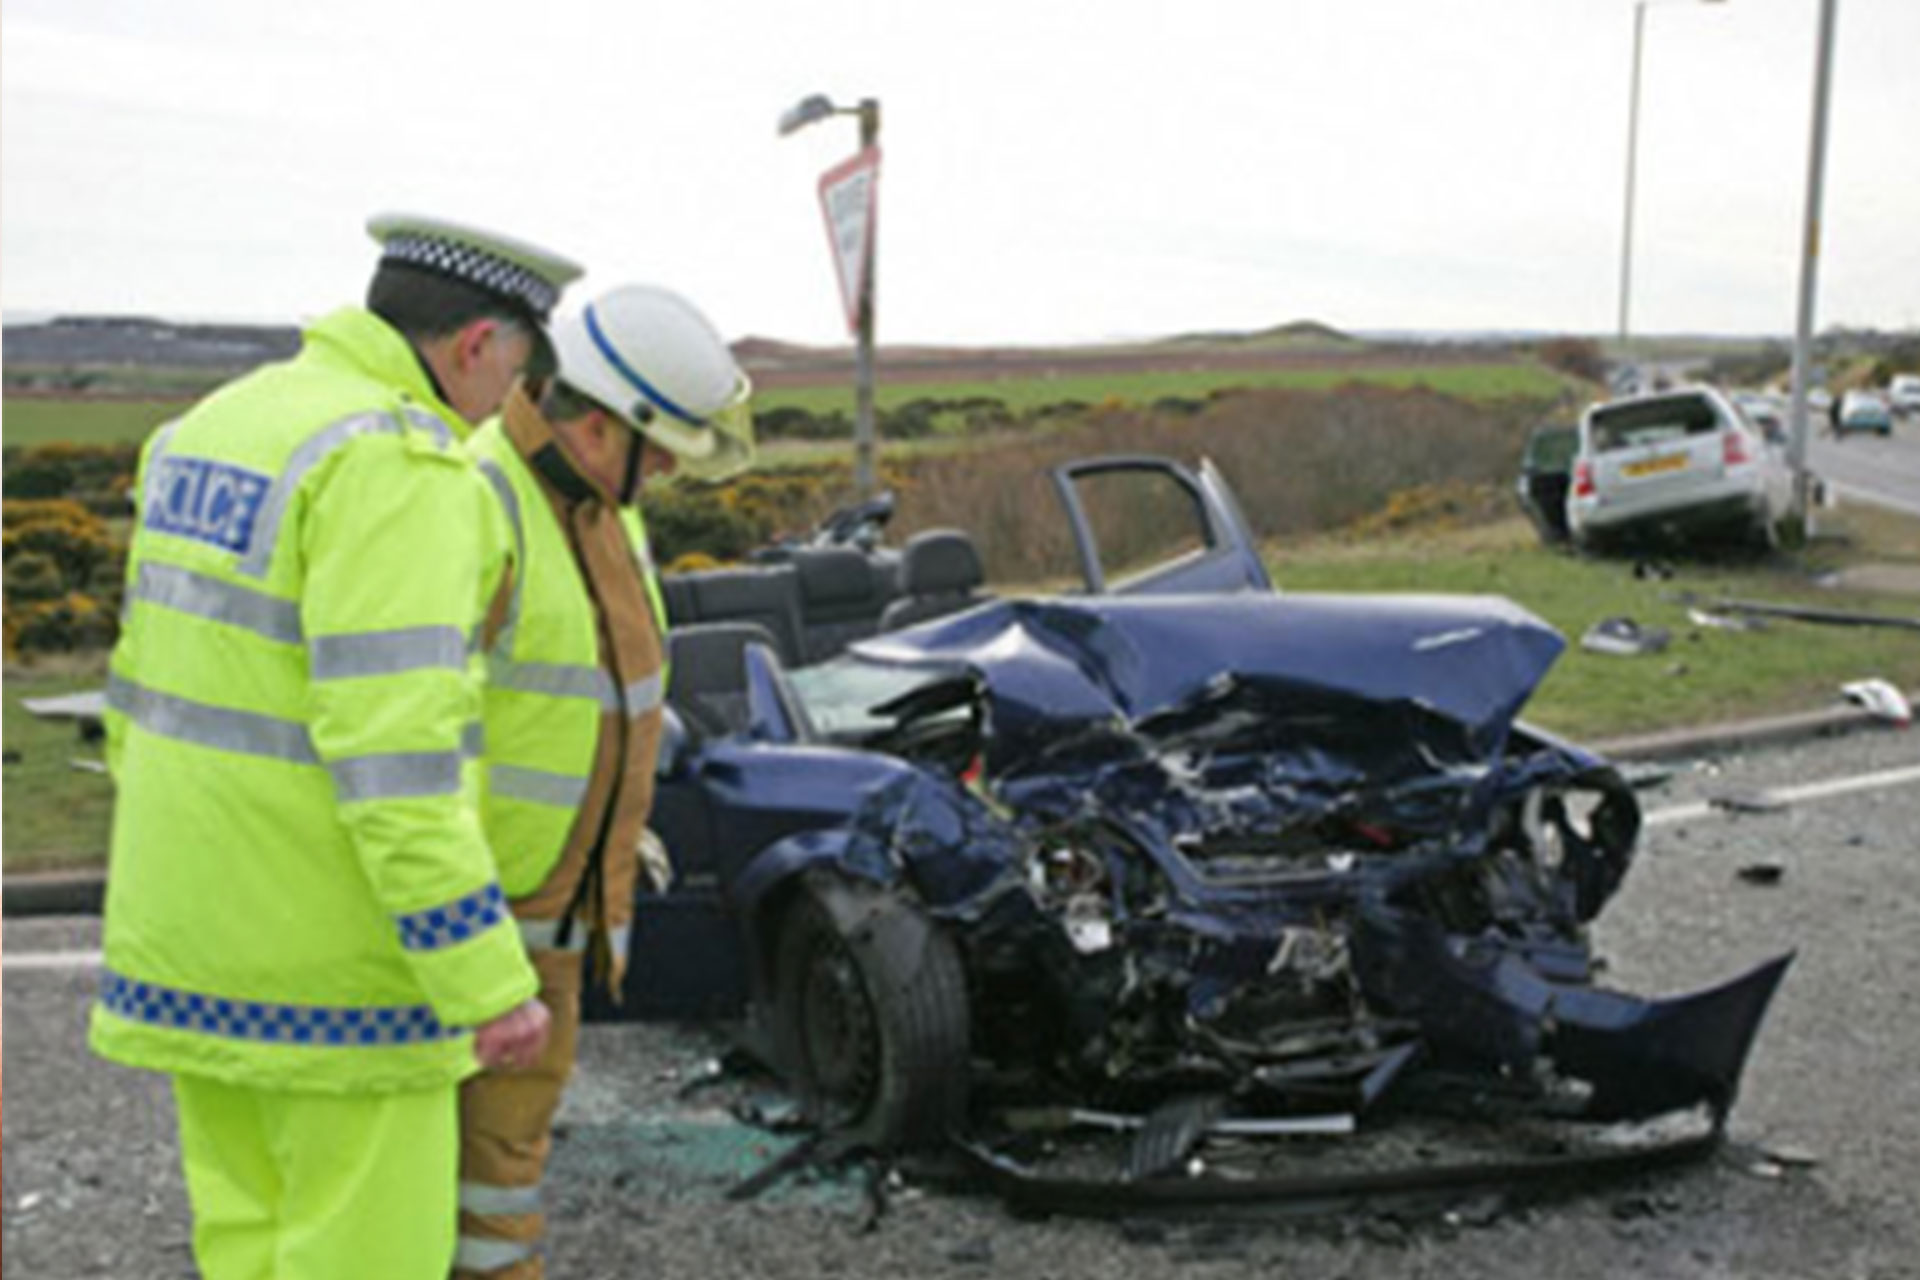 Road fatality rise linked to cuts